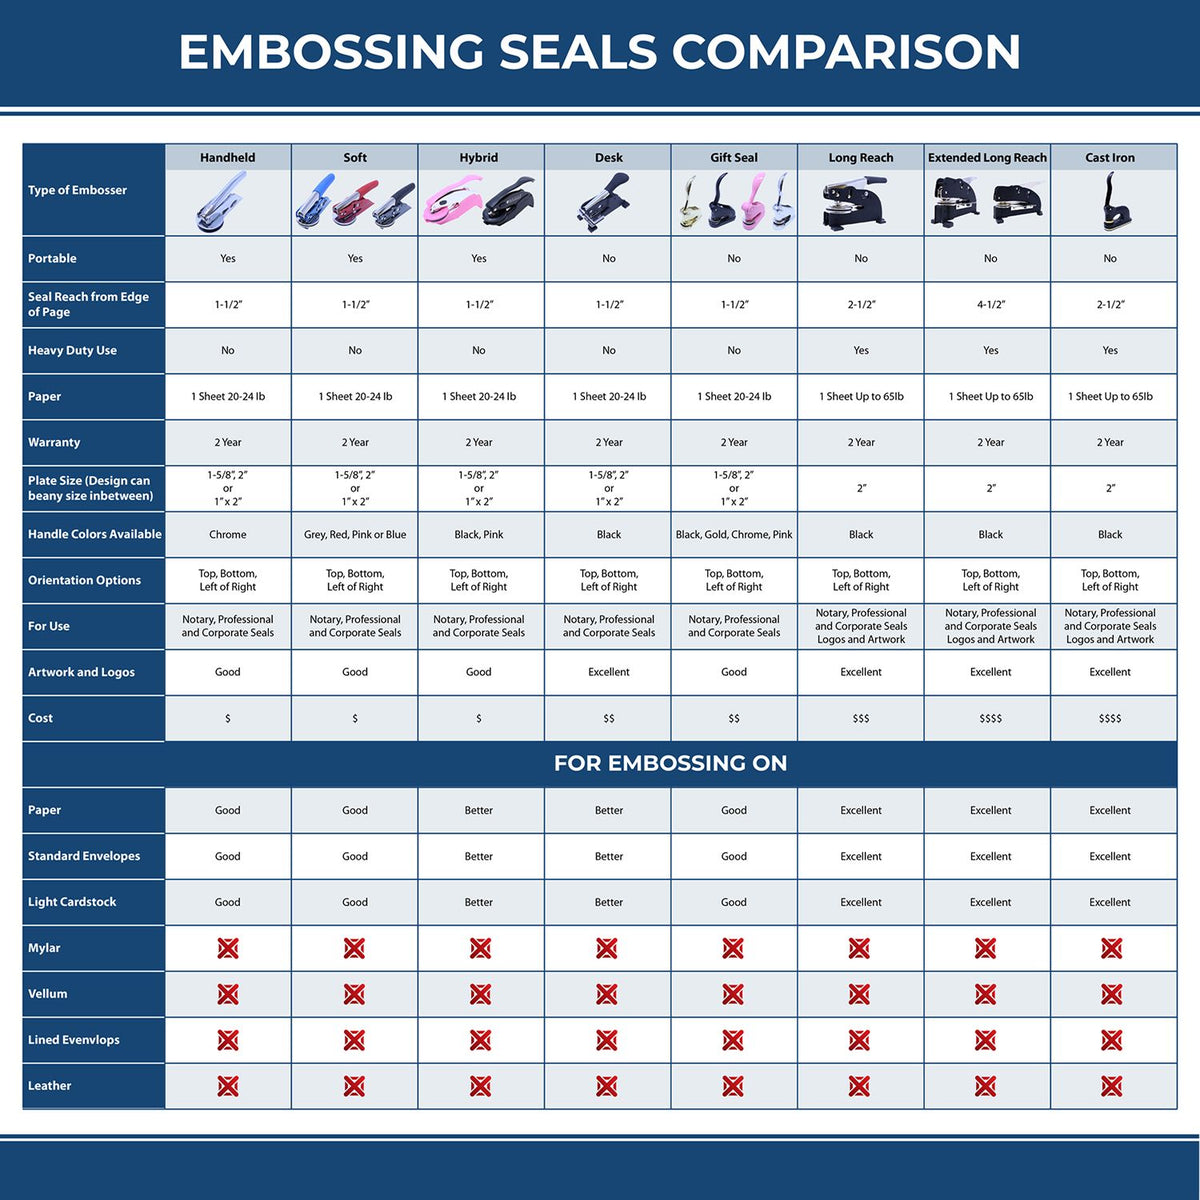 A comparison chart for the different types of mount models available for the Soft Vermont Professional Geologist Seal